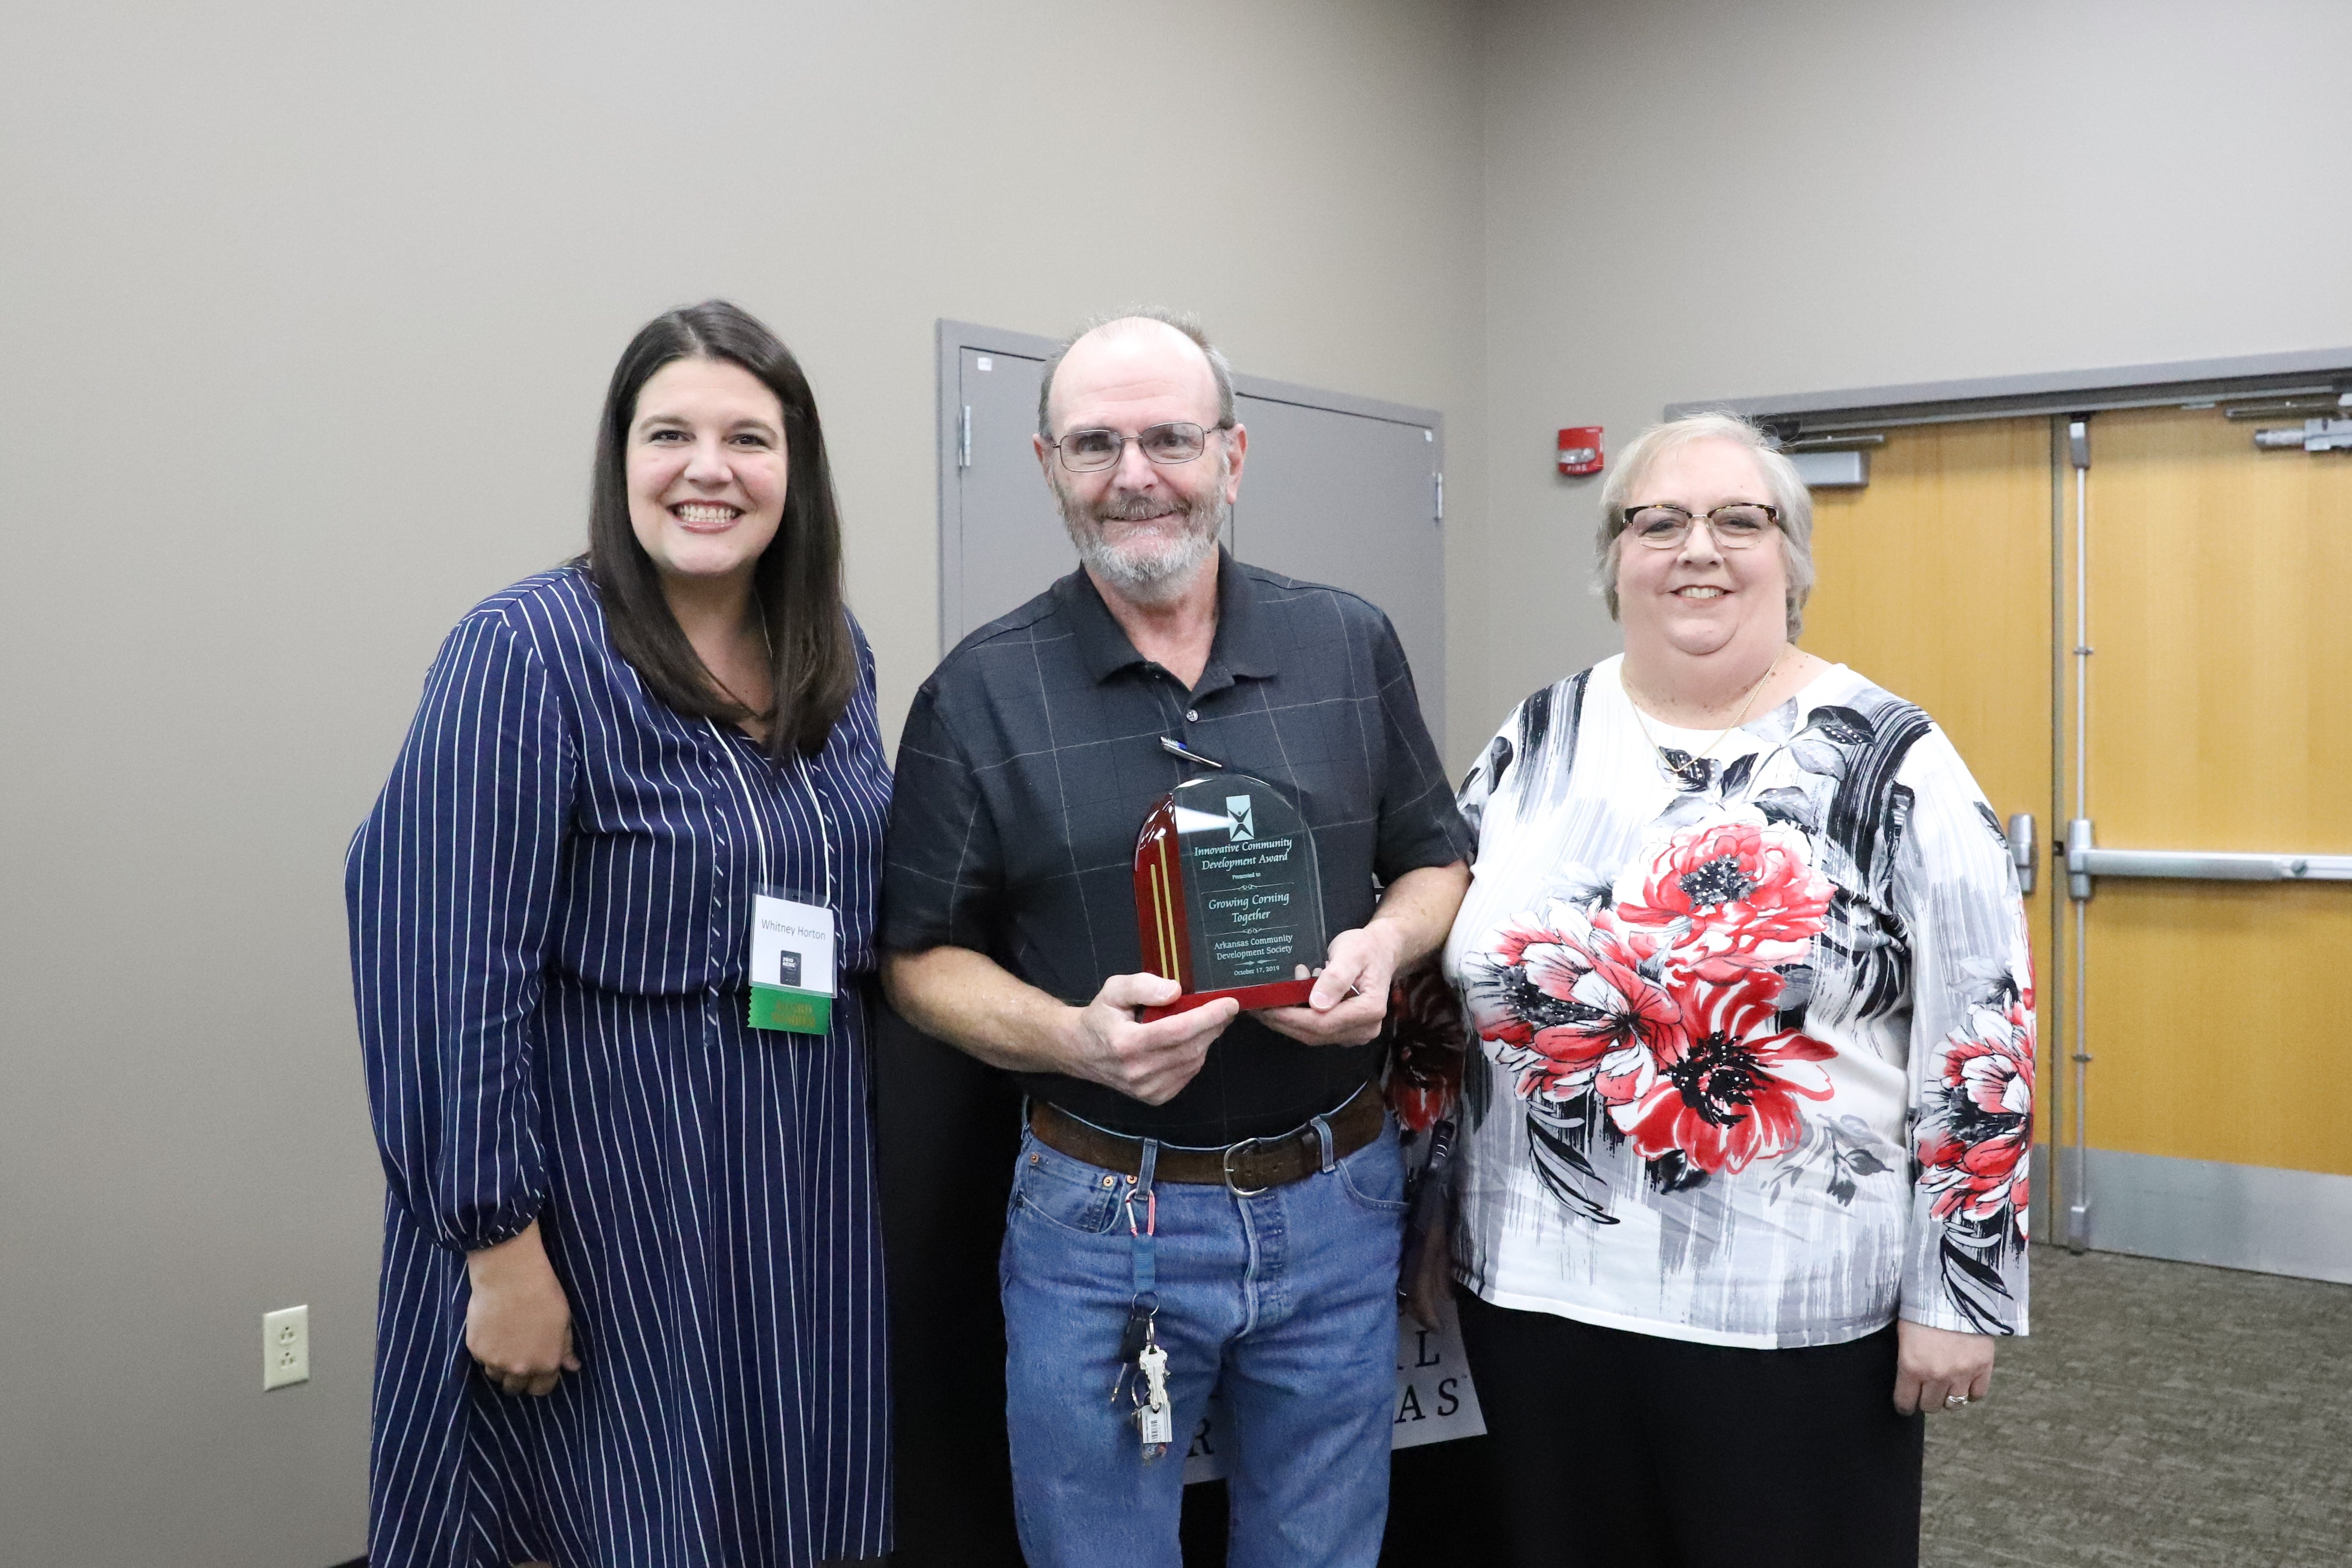 Receiving the Innovative Community Development Award for Growing Corning Together is Bobby and Pam Lowe; presenting the award is Whitney Horton, Vice President of the Arkansas Community Development Society (first on the left).